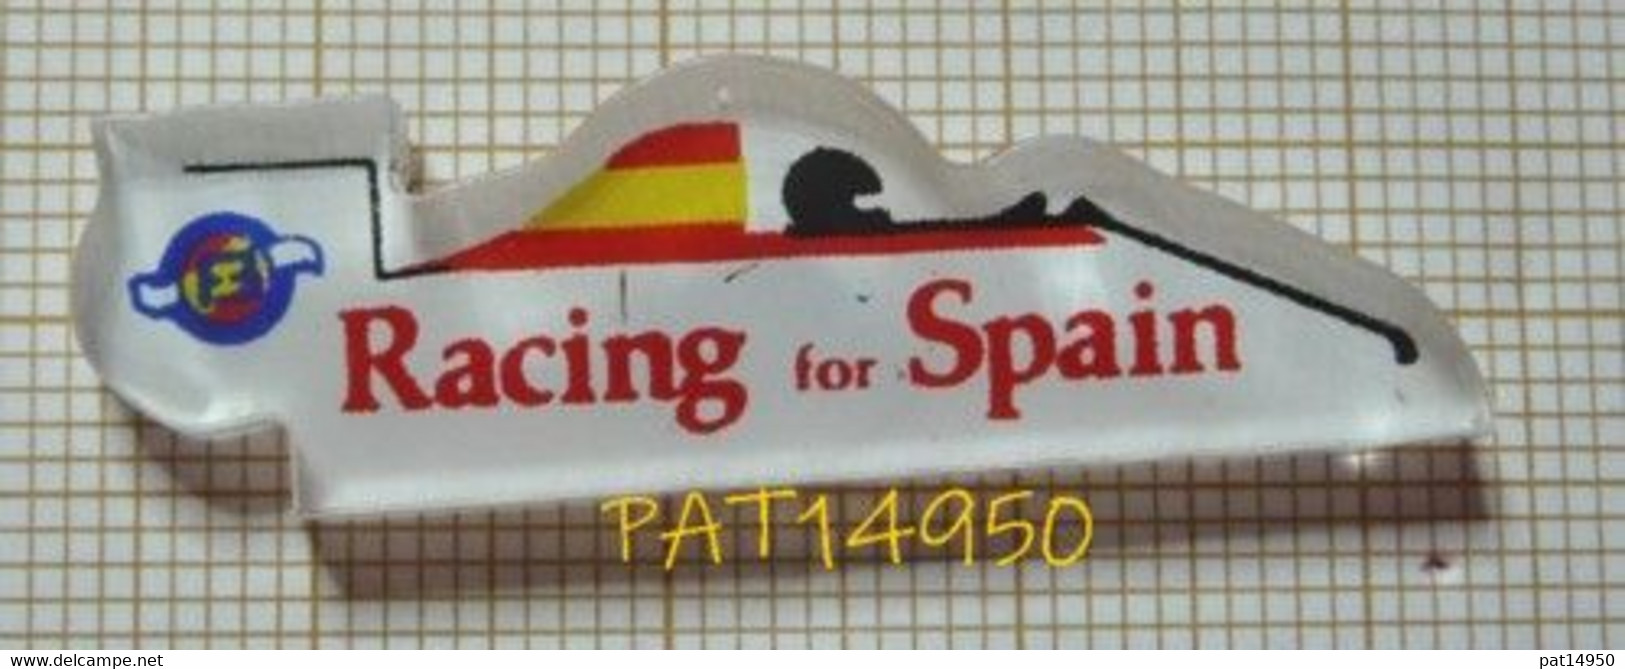 PAT14950 F1 RACING For SPAIN ESPAGNE - F1